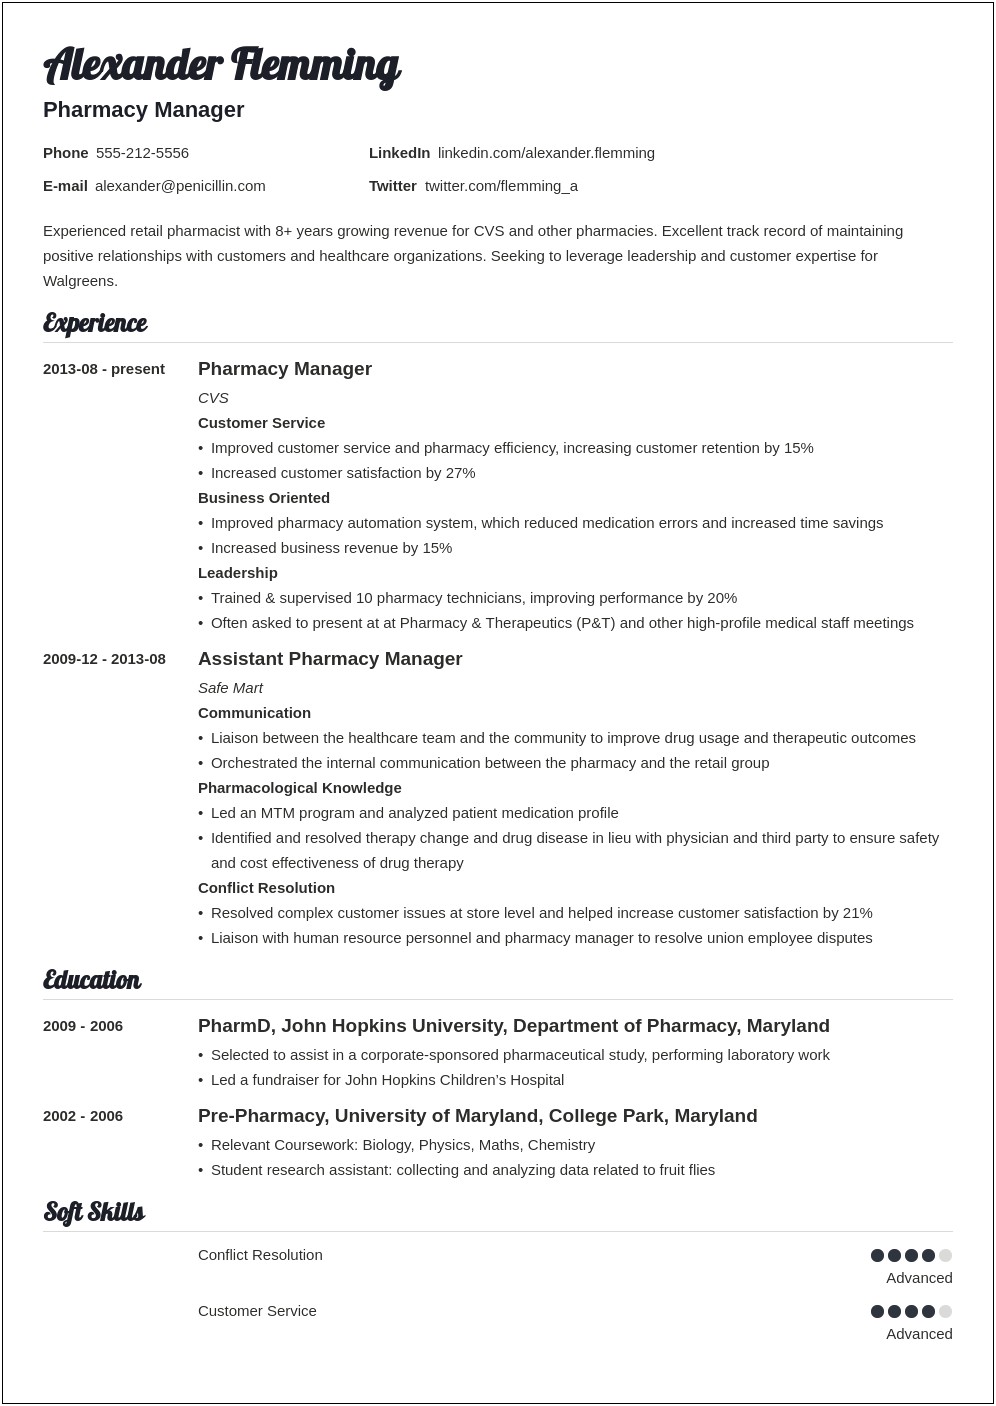 Objective Resume Examples For Pharmacist